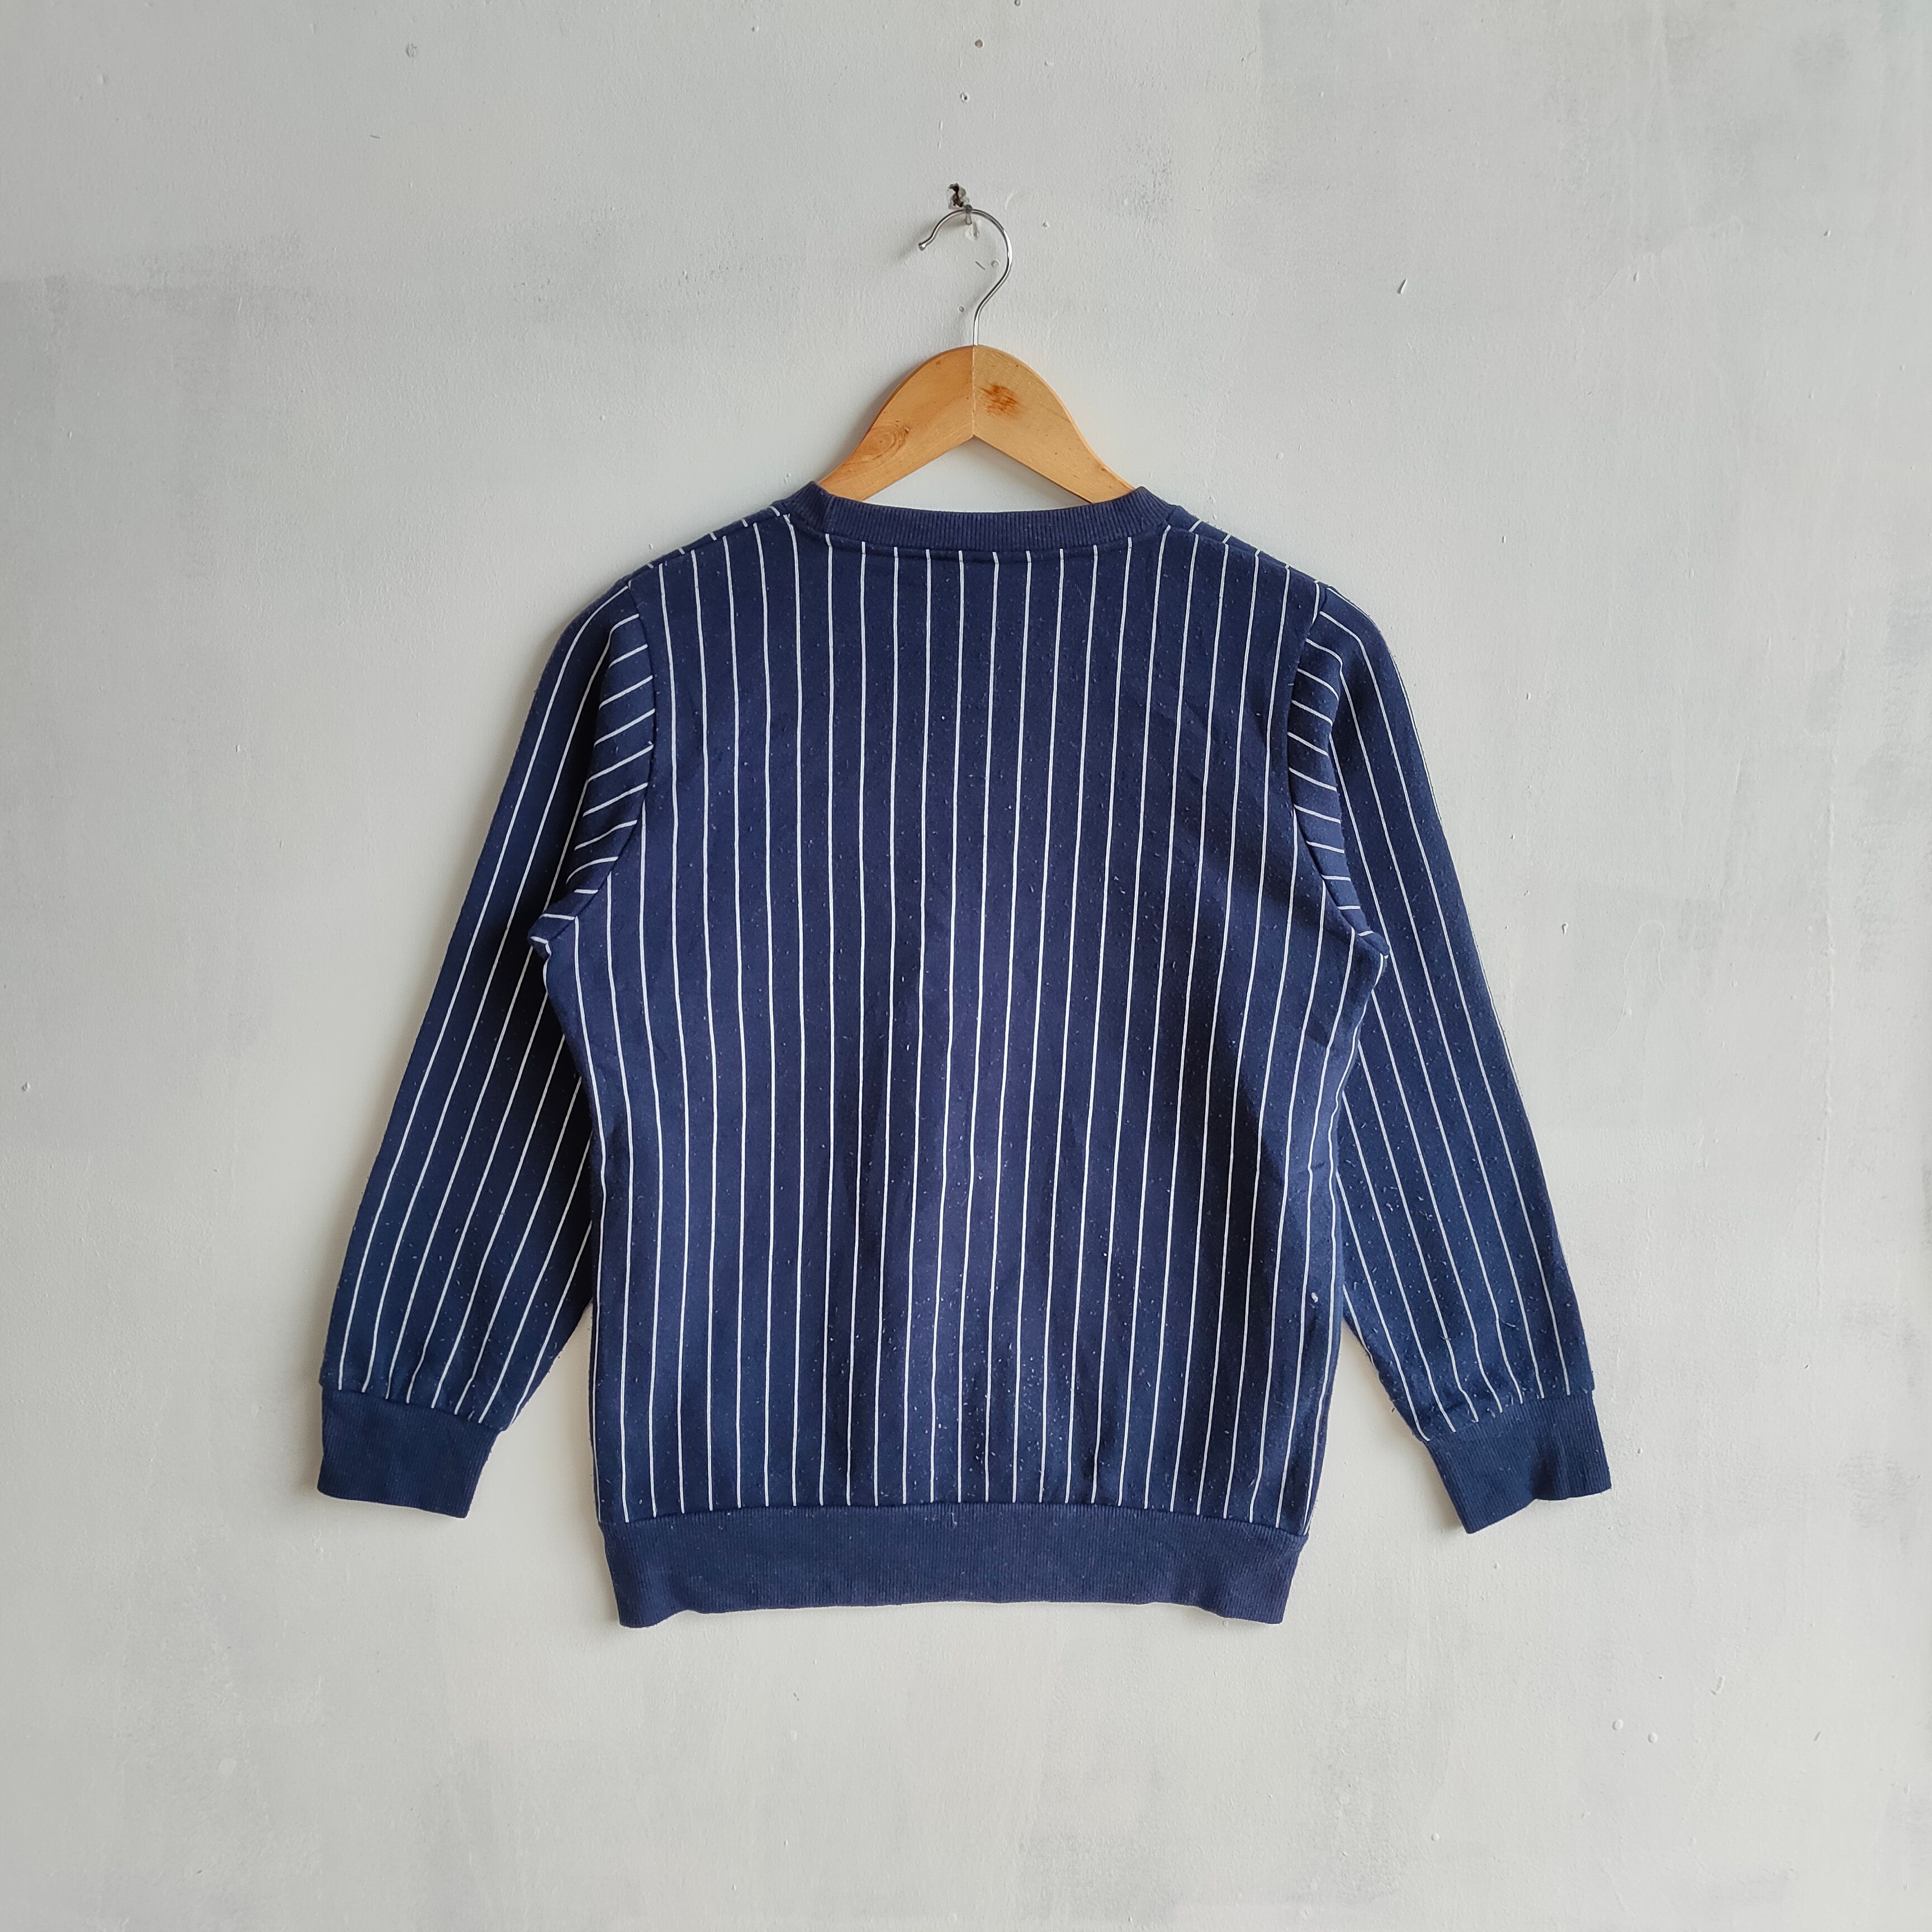 CONVERSE Big Embroidery Spell Out Stripe Pattern Sweatshirt - 5